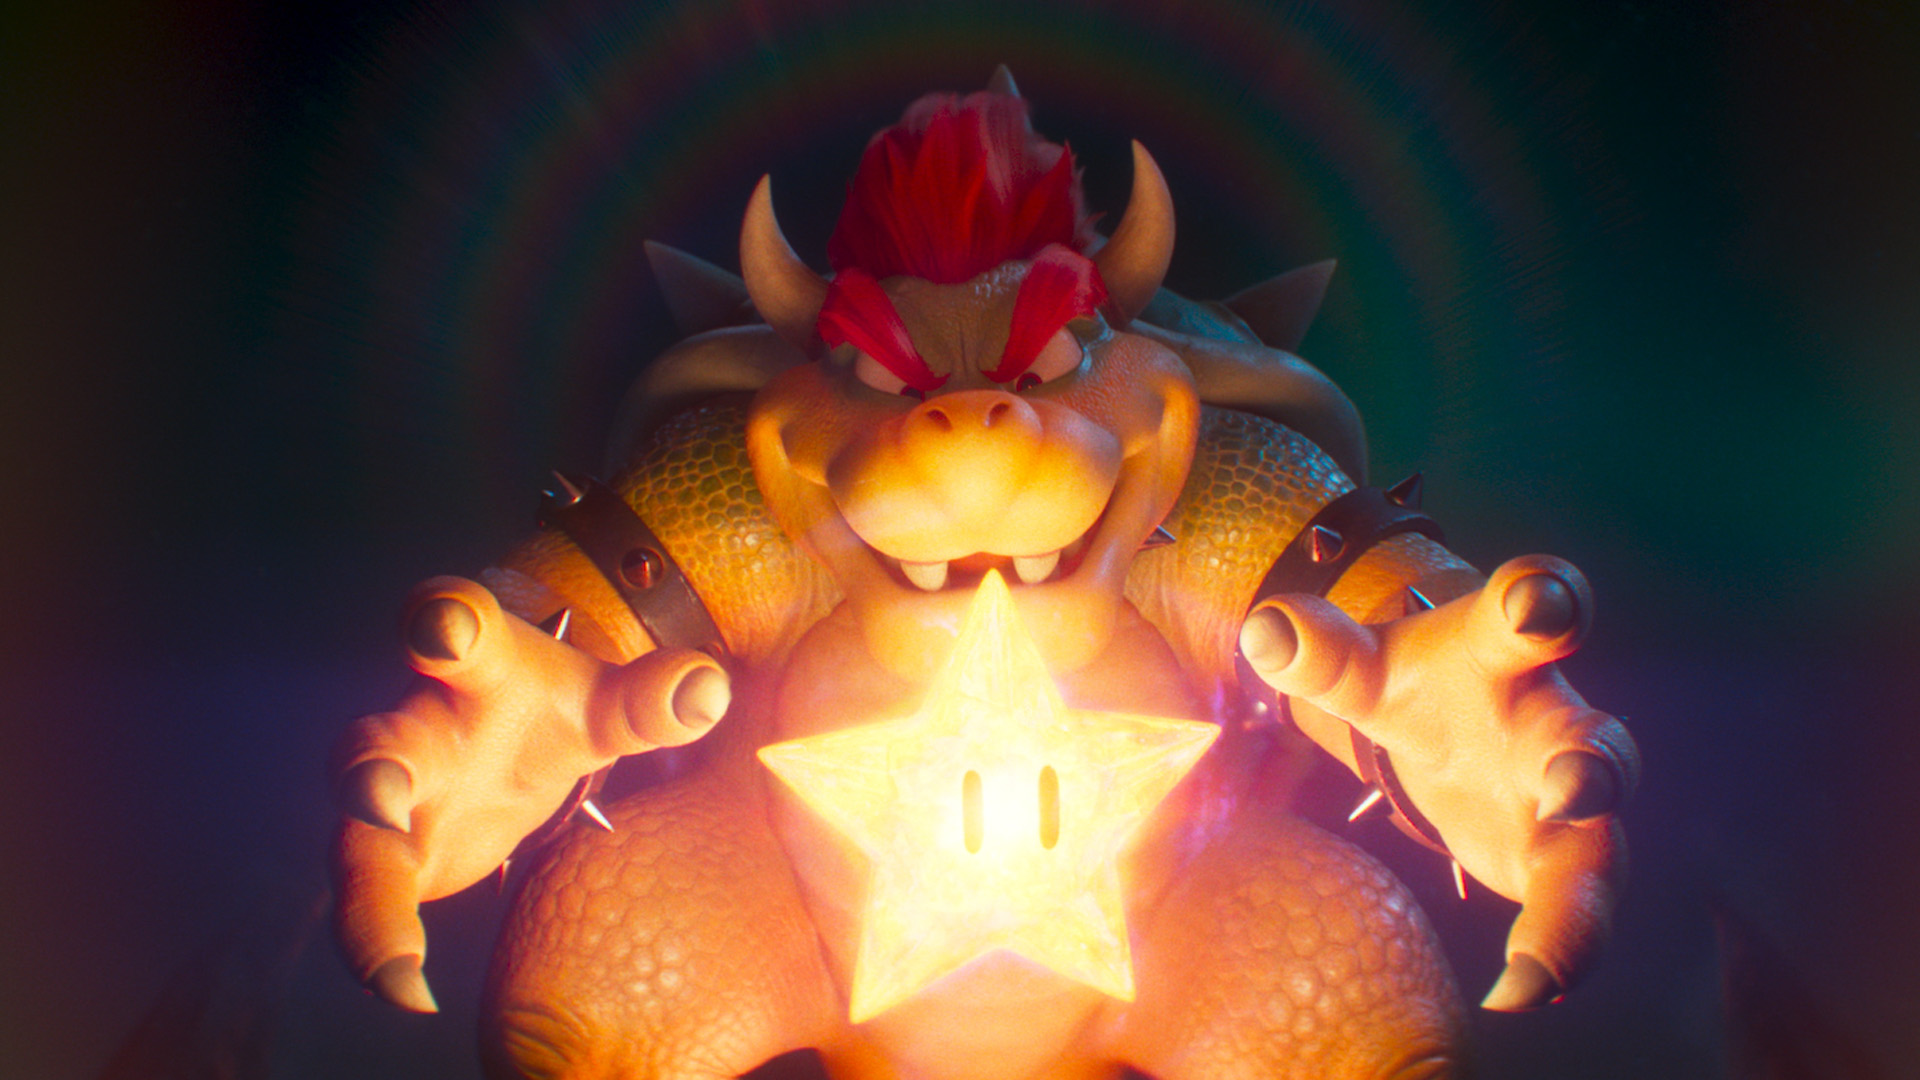 Bowser laughs as he acquires the Super Star in the Super Mario Bros. movie.